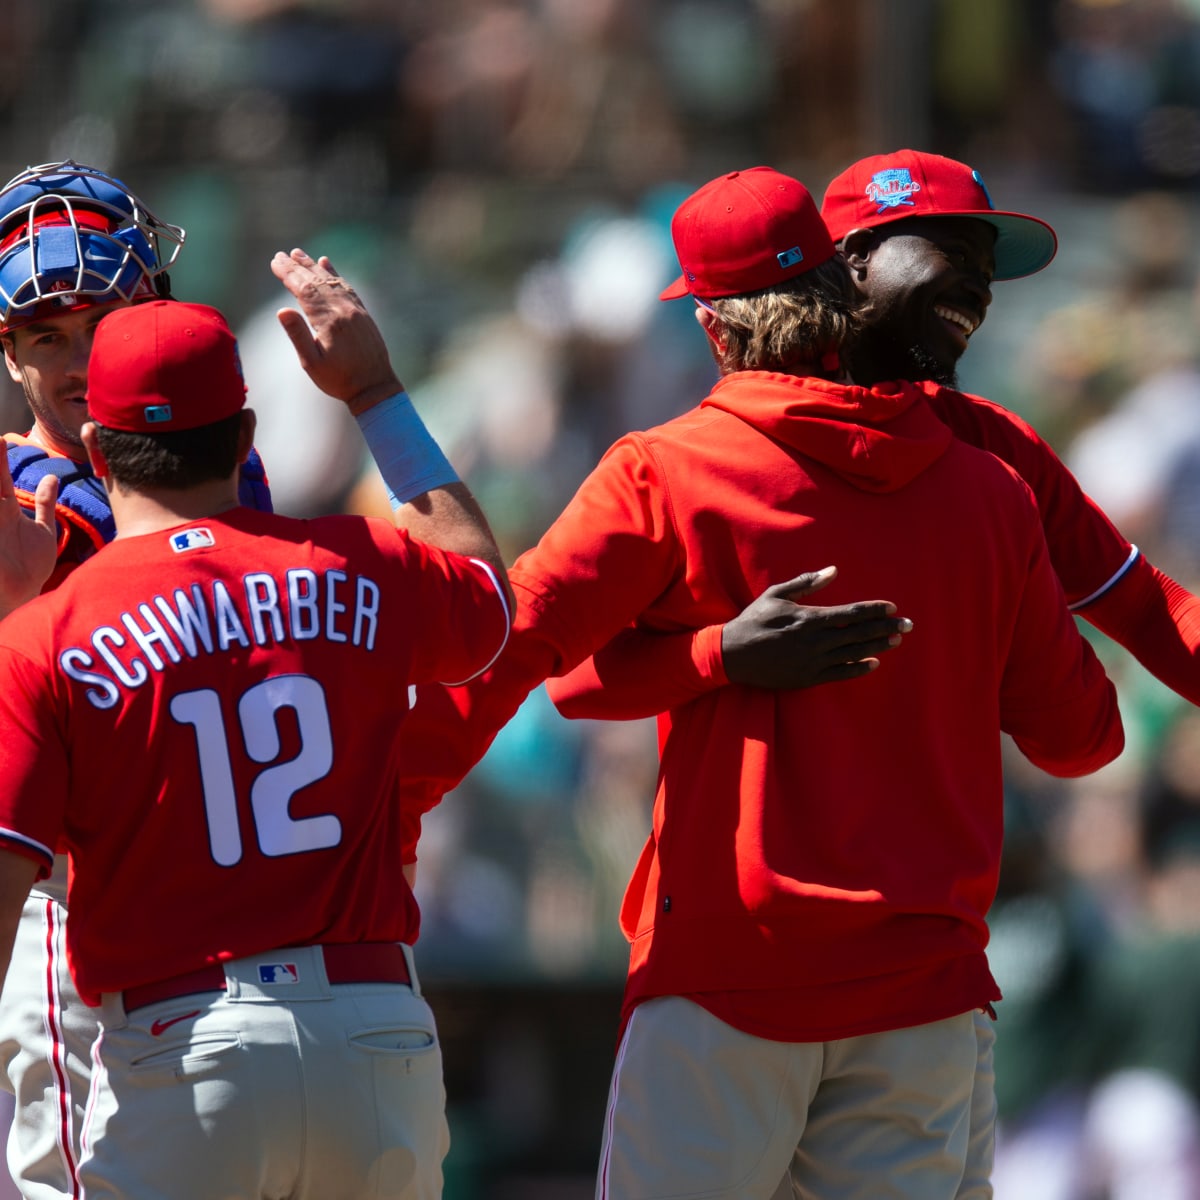 Cubs playoff chances, Drew Smyly's struggles and Shohei Ohtani